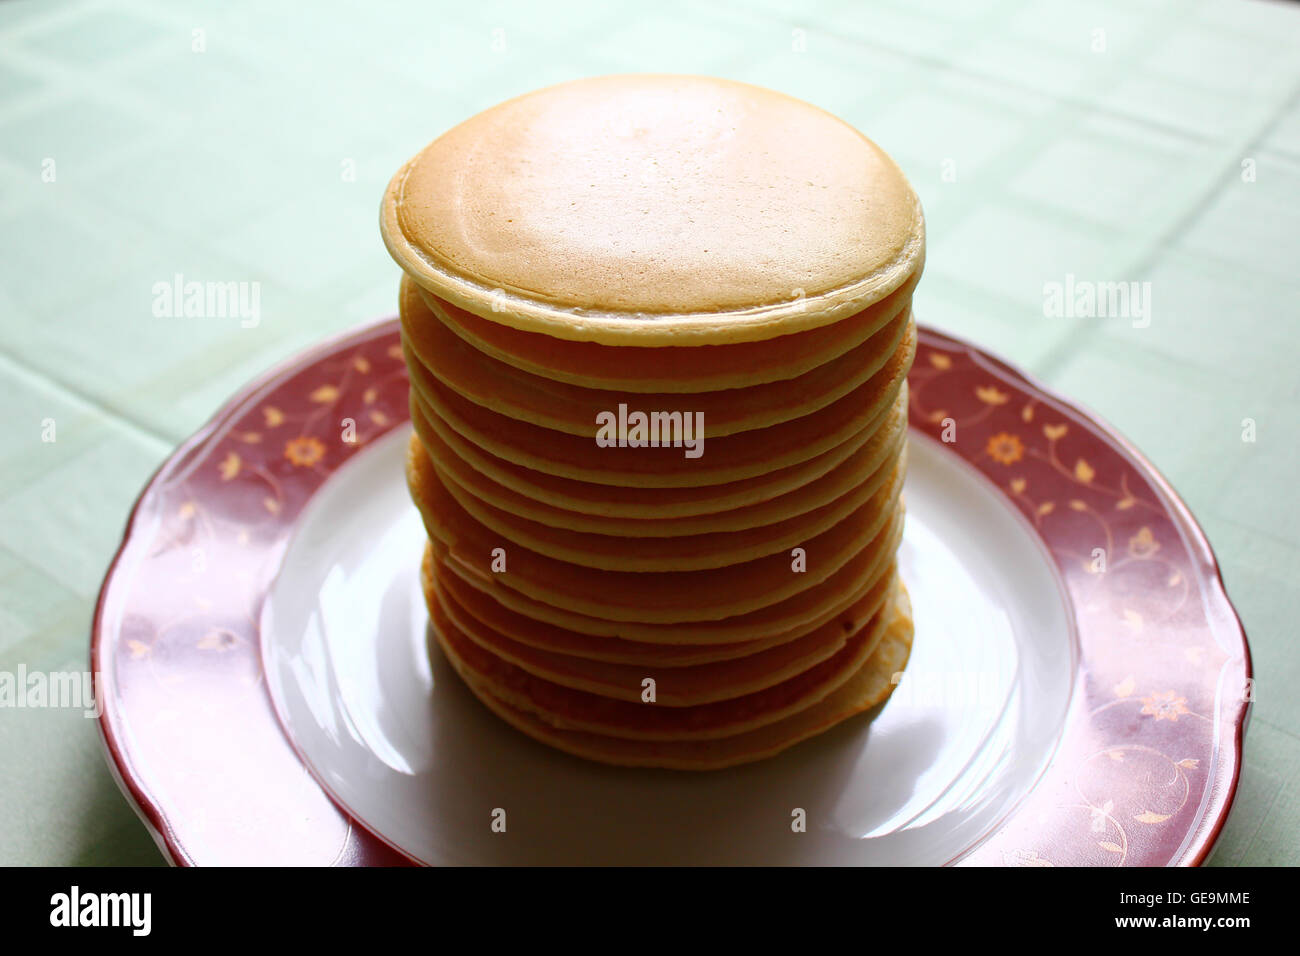 The stack of pancakes on the plate Stock Photo